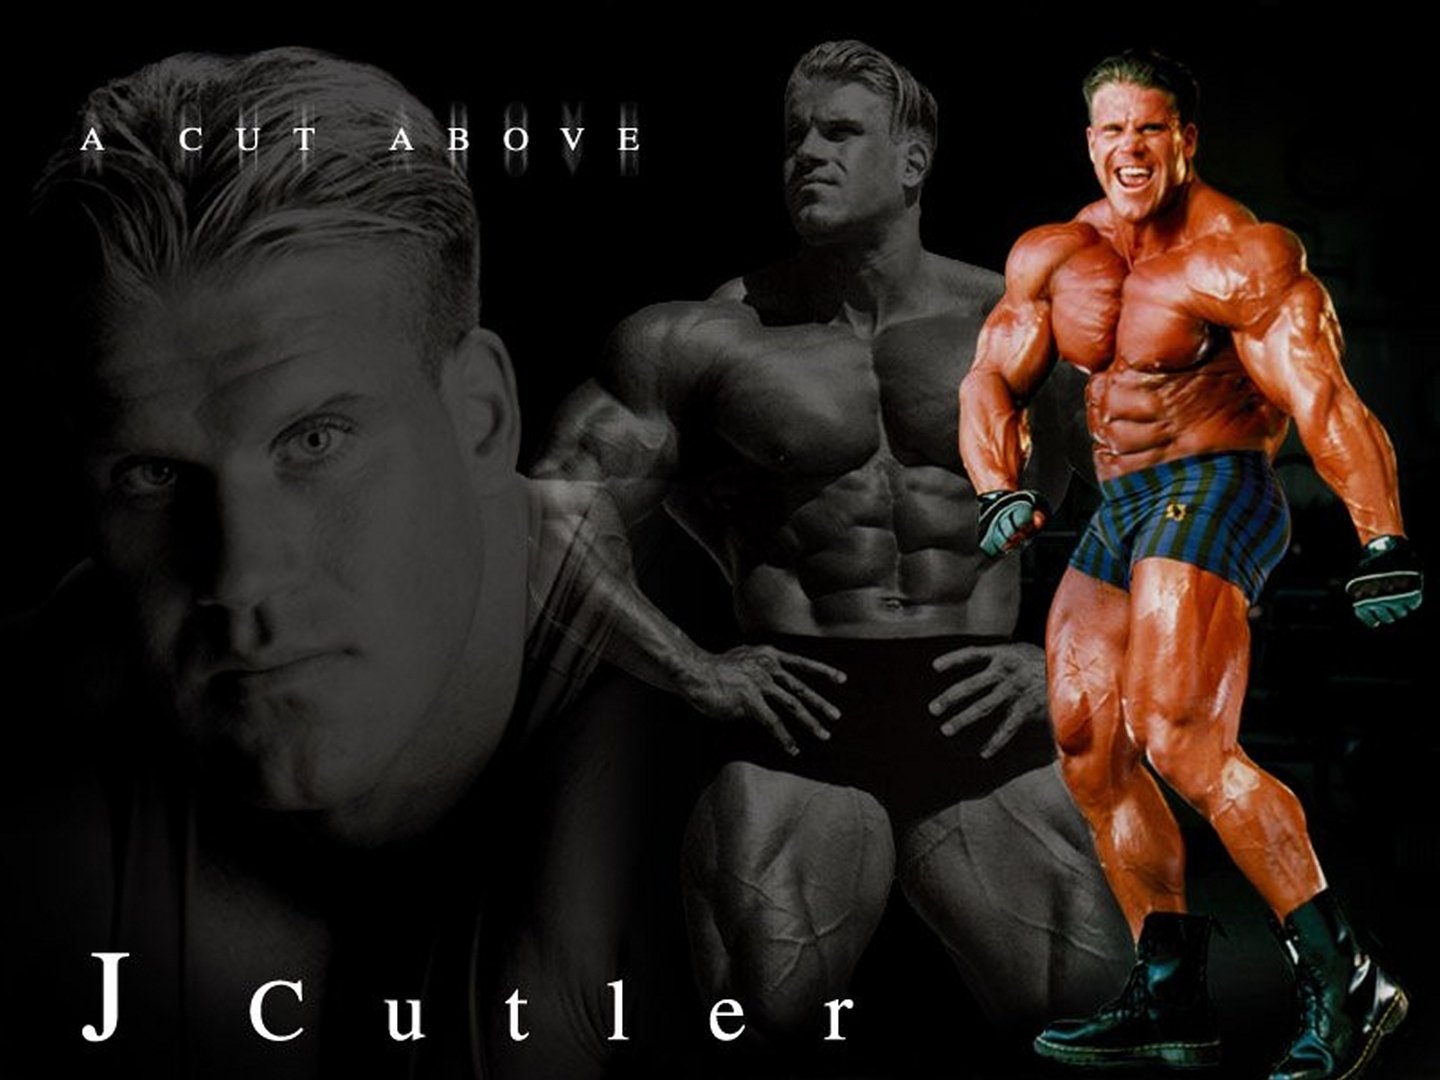 Jay Culter Wallpapers